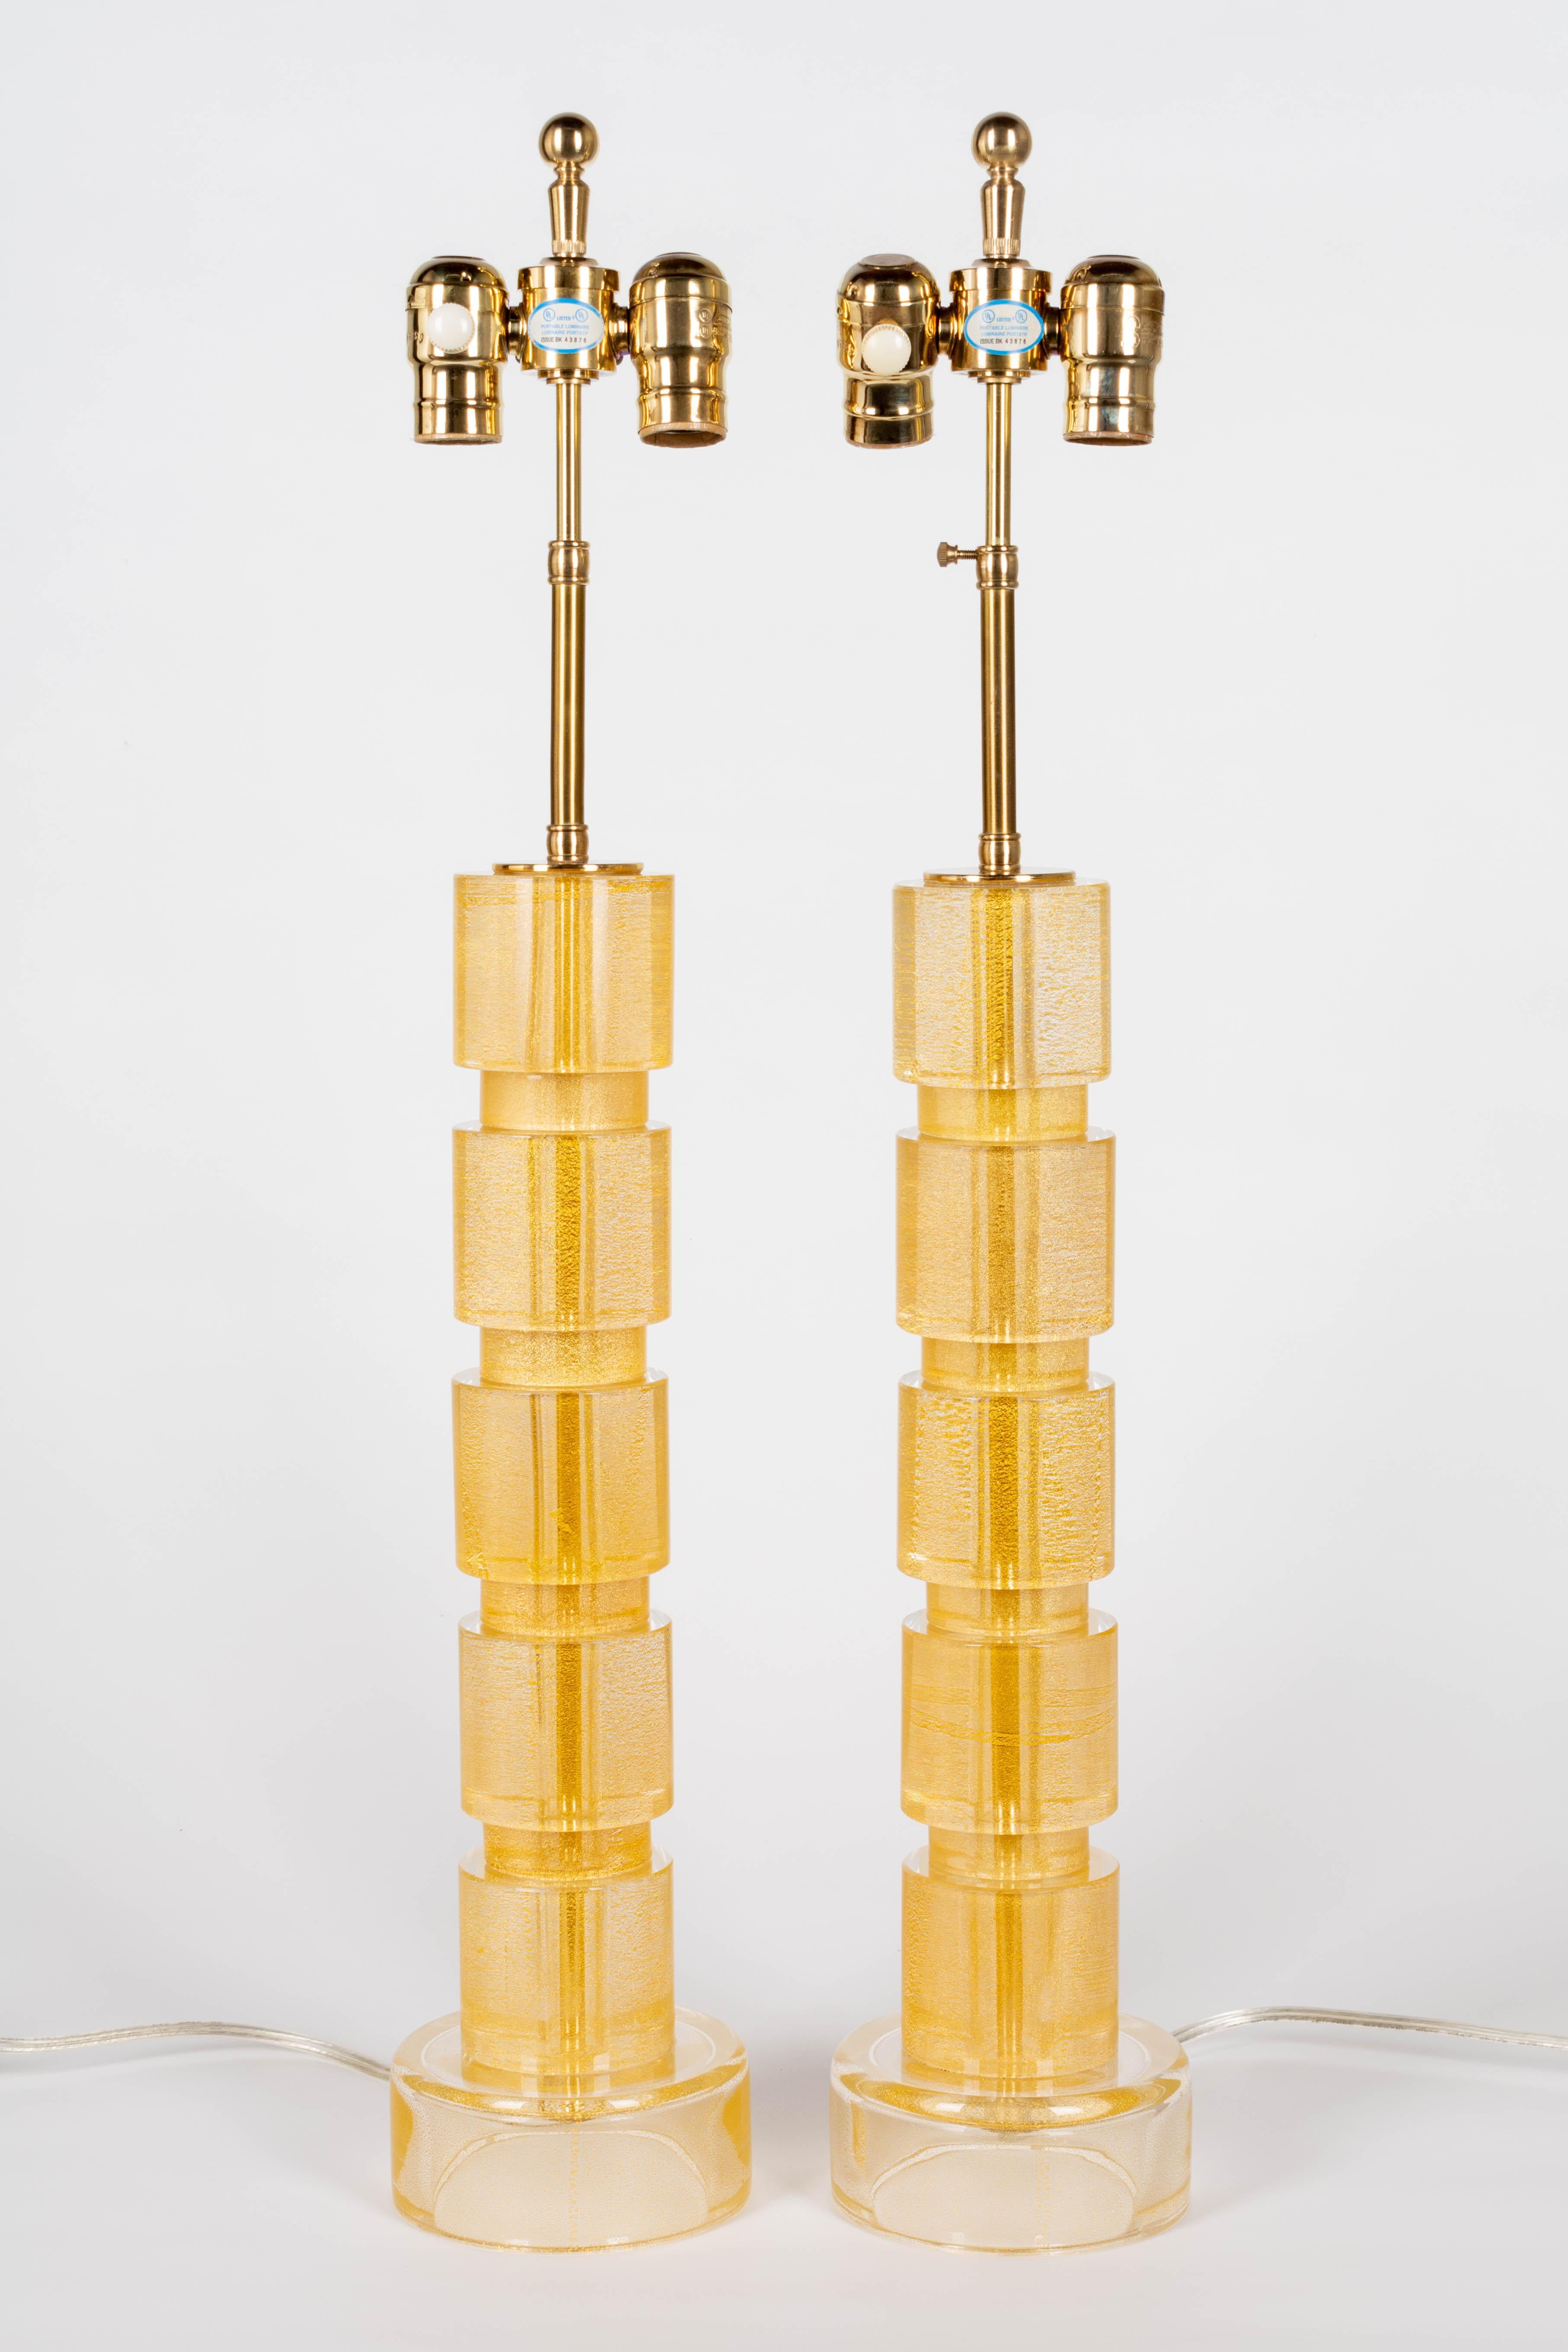 A pair of tall Murano glass column lamps comprised of five solid glass cylinders with gold inclusions. Original high quality polished brass adjustable height, pivoting double cluster sockets with dimmer switches. Shades are not included but measure